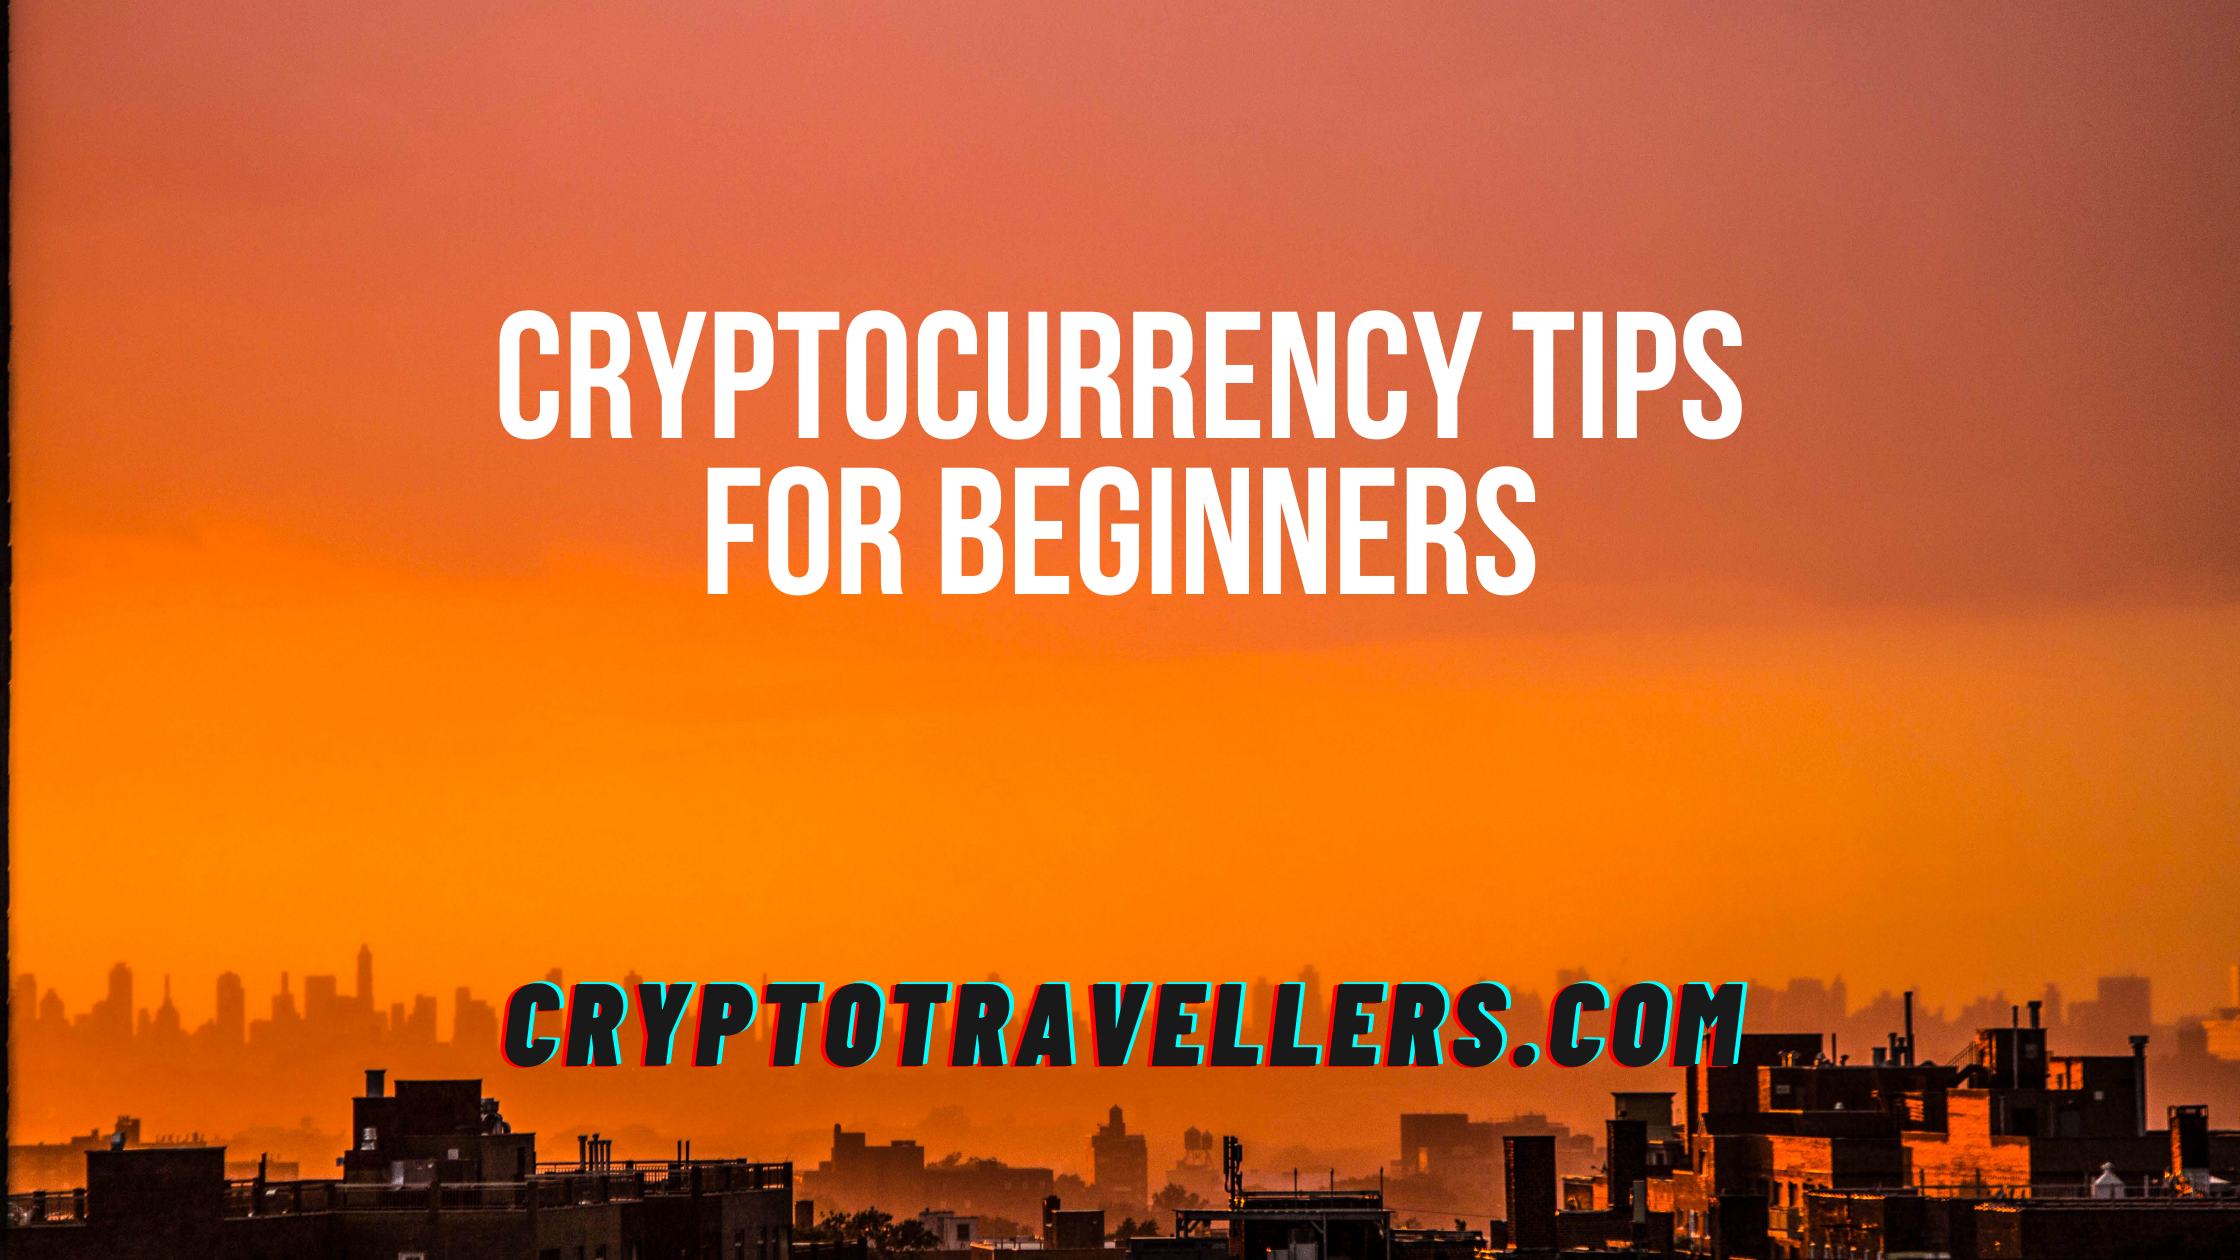 Cryptocurrency Tips for Beginners: The Basics